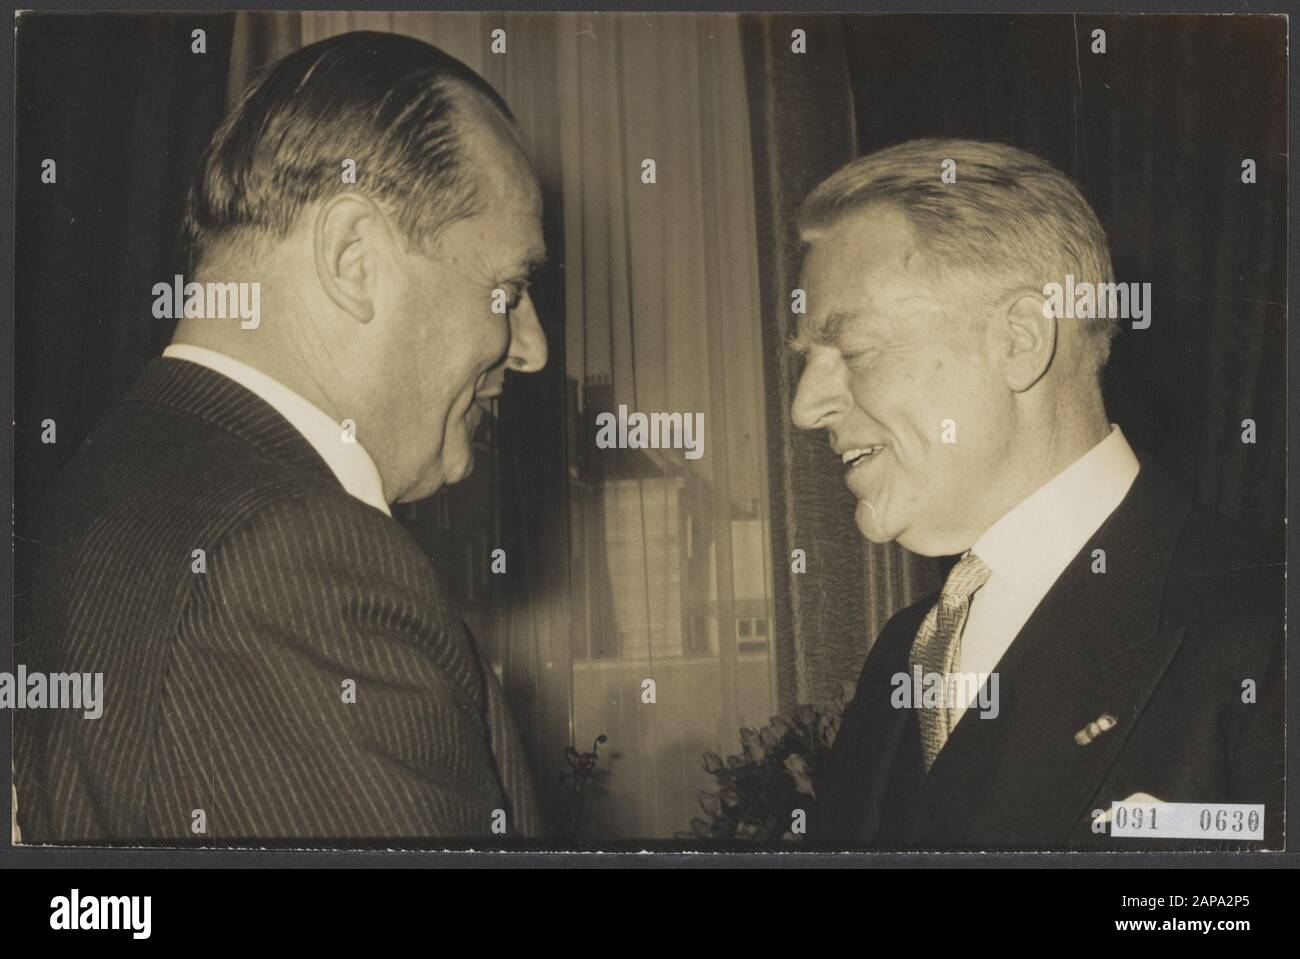 Farewell reception of Dr. M. W. Holtrop, director of the Dutch Bank, at the Amstelhotel, mr. P. Blaisse (left) came to say goodbye Date: 26 april 1967 Location: Amsterdam, Noord- Holland Keywords: farewell, directors, receptions Personal name: Blaise, P., Holstop, M.W. Stock Photo